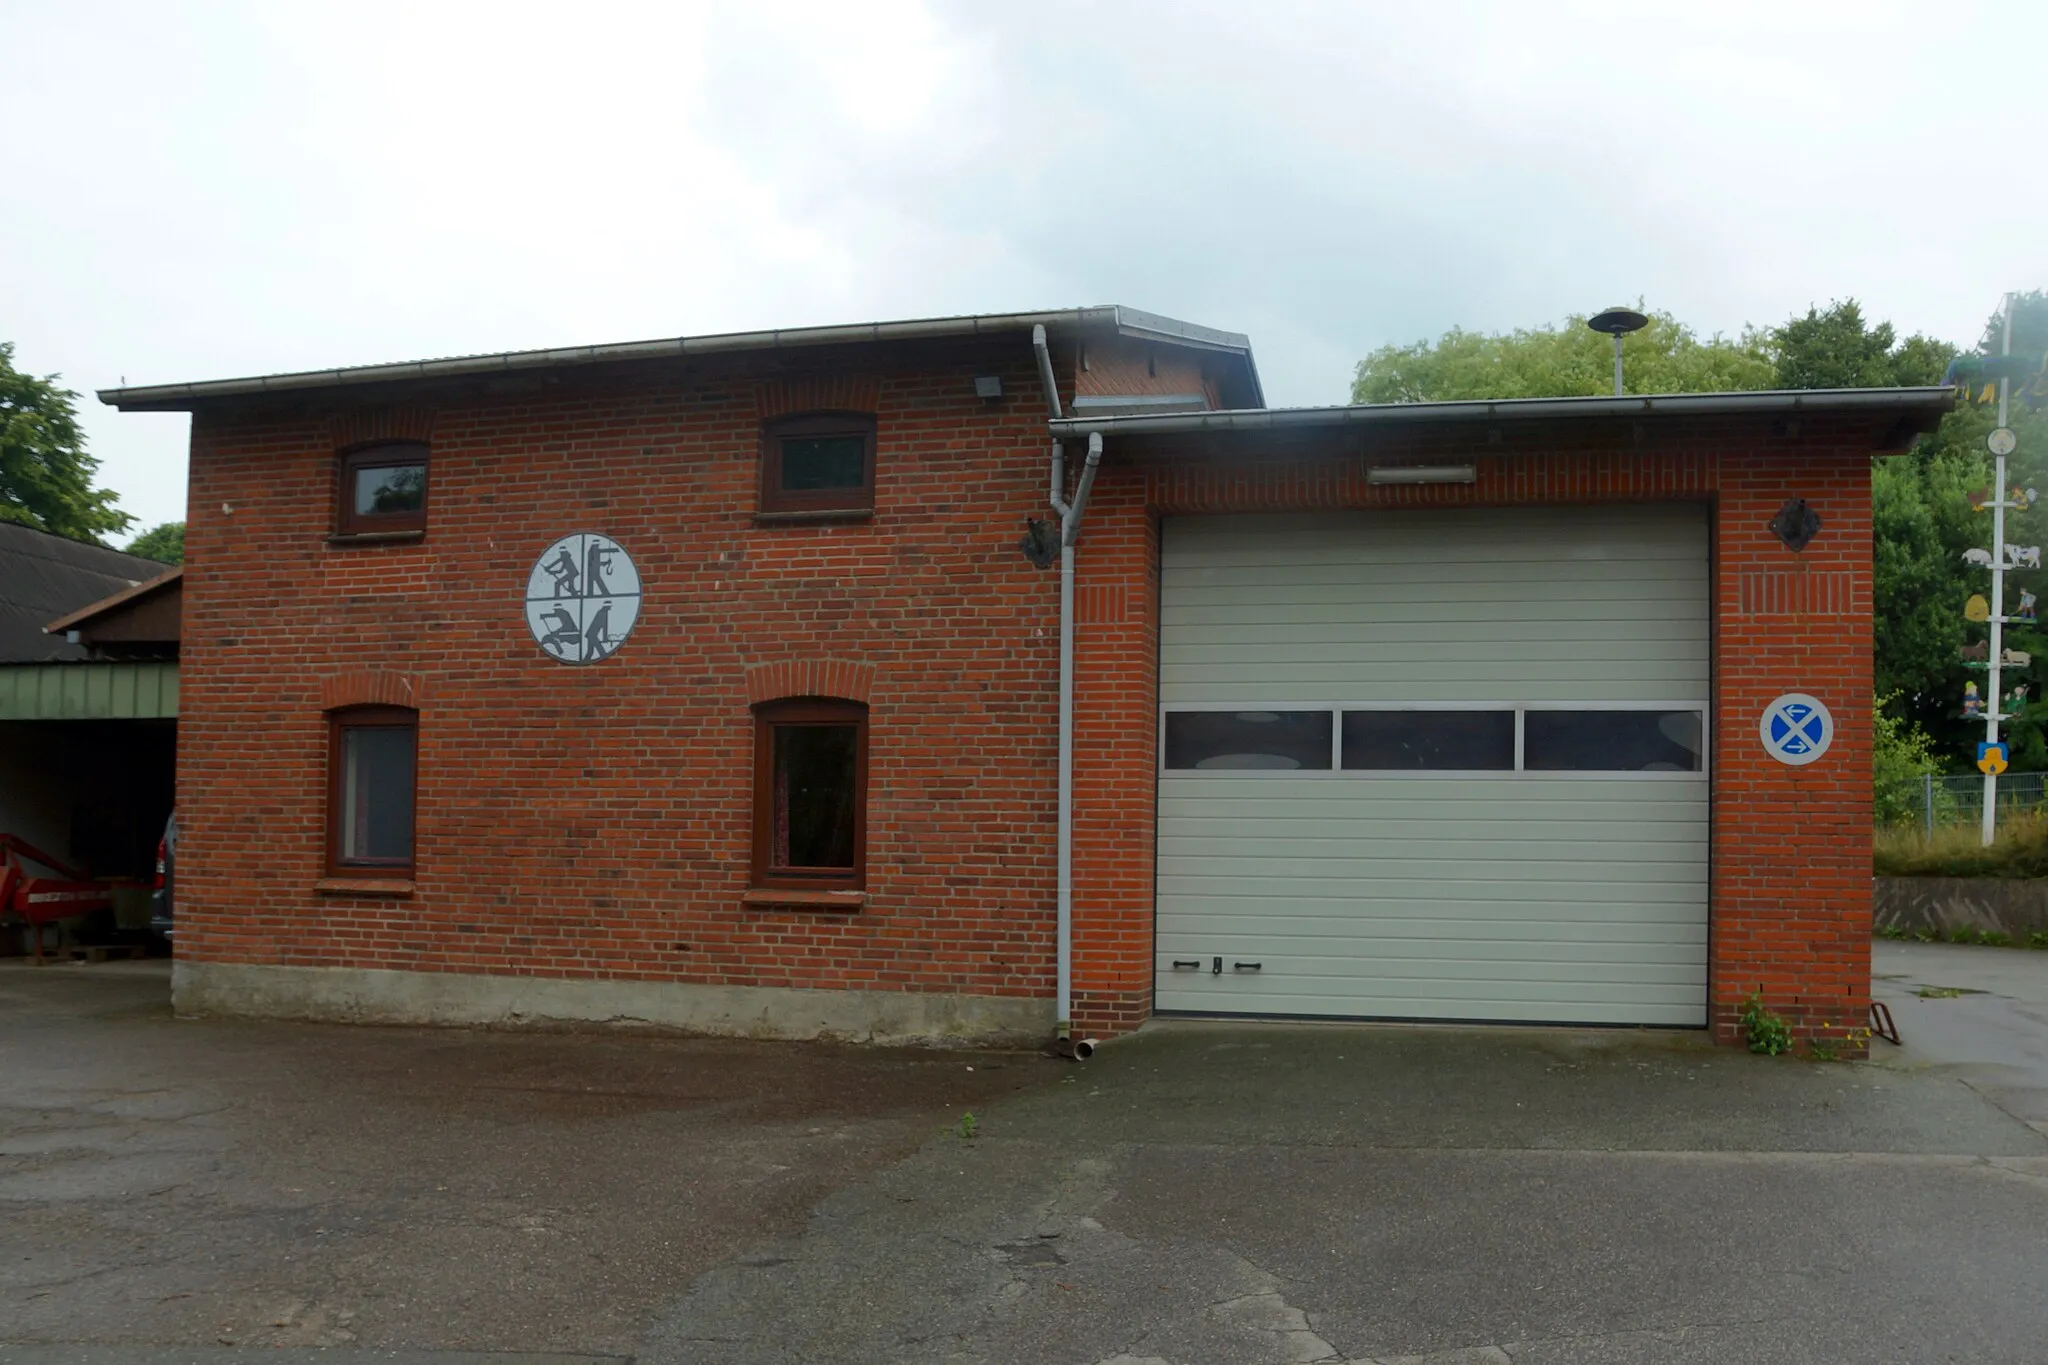 Photo showing: Tarbek, Germany: Firehouse of volunteer firefighters